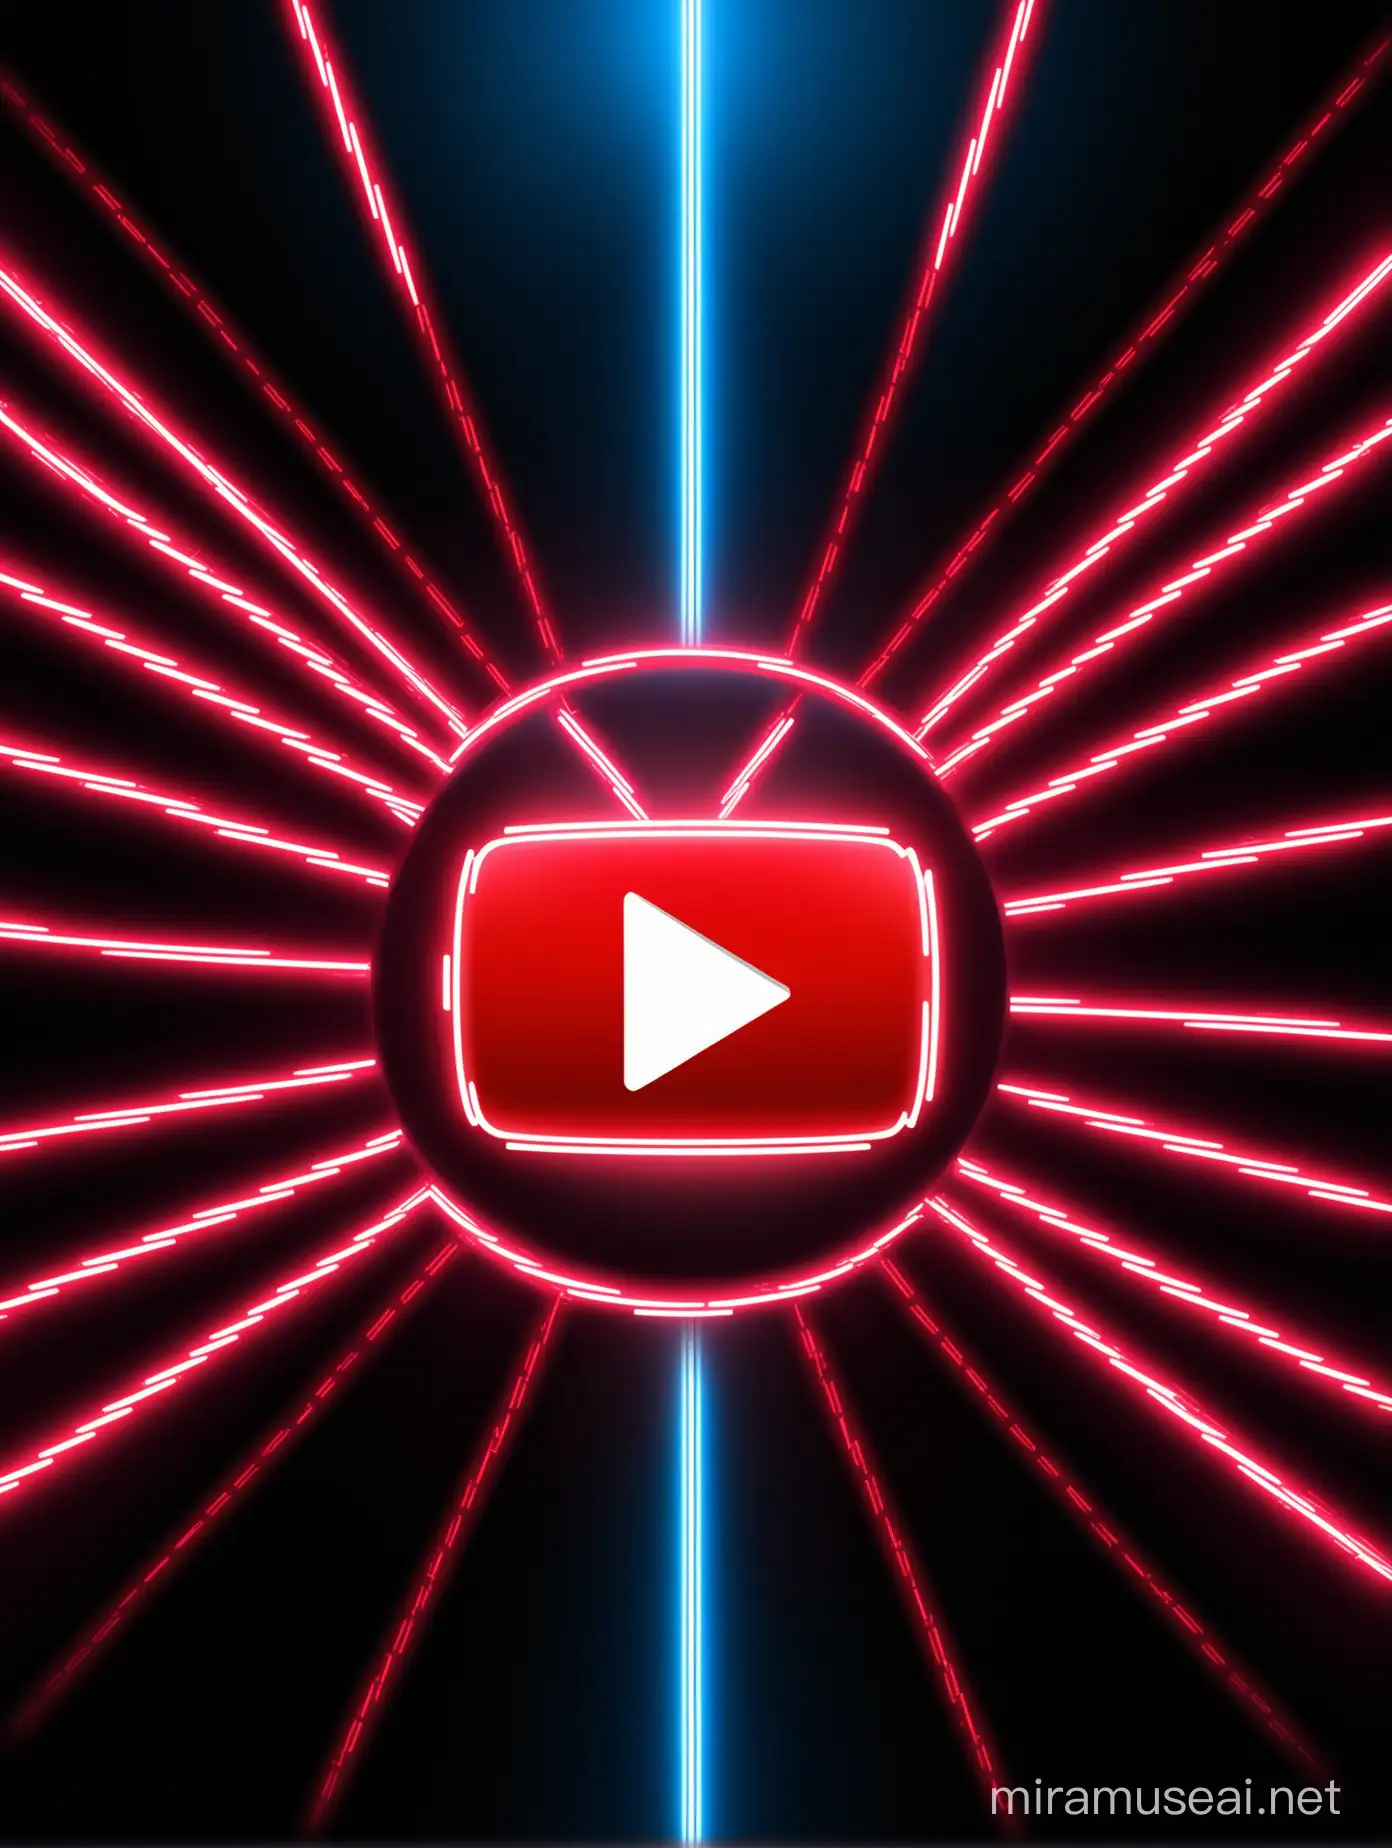 neon 100% red-white electric youtube logo in a dark futuristic background with red neon thunders